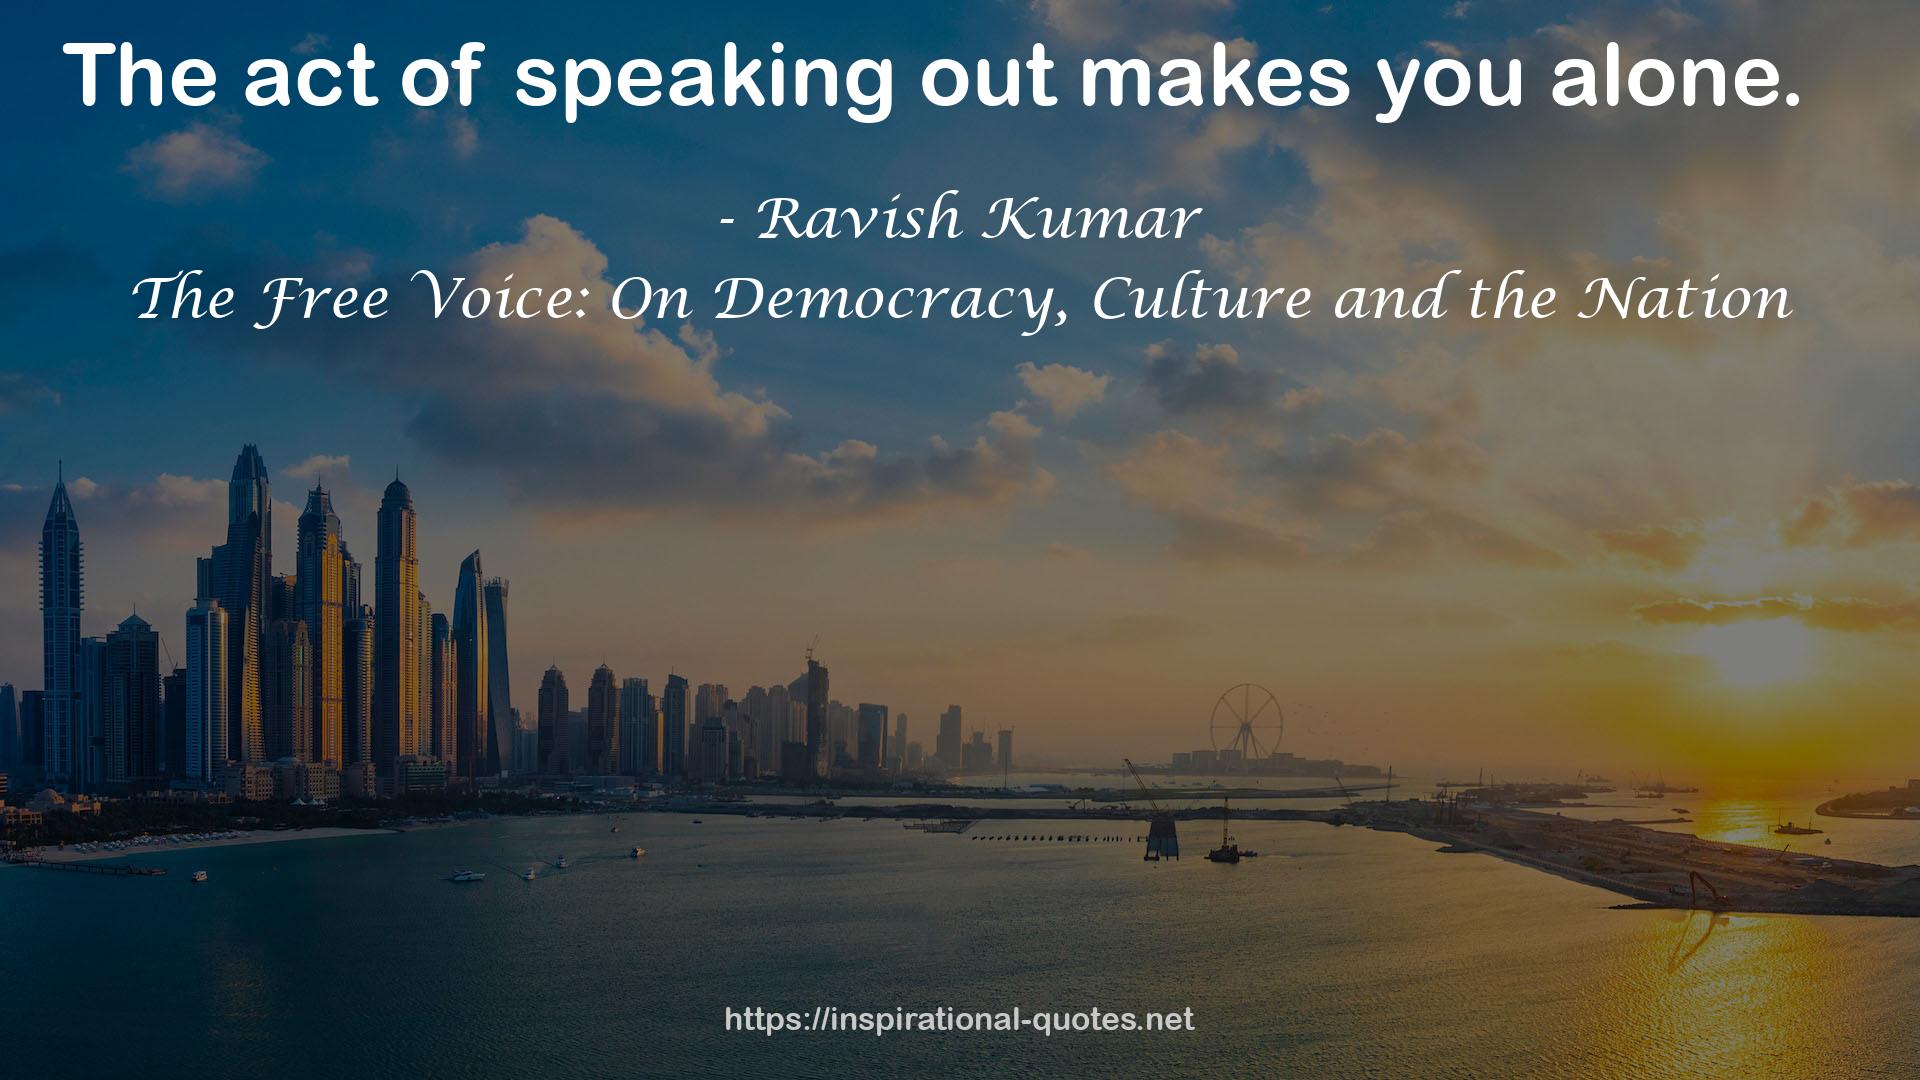 The Free Voice: On Democracy, Culture and the Nation QUOTES